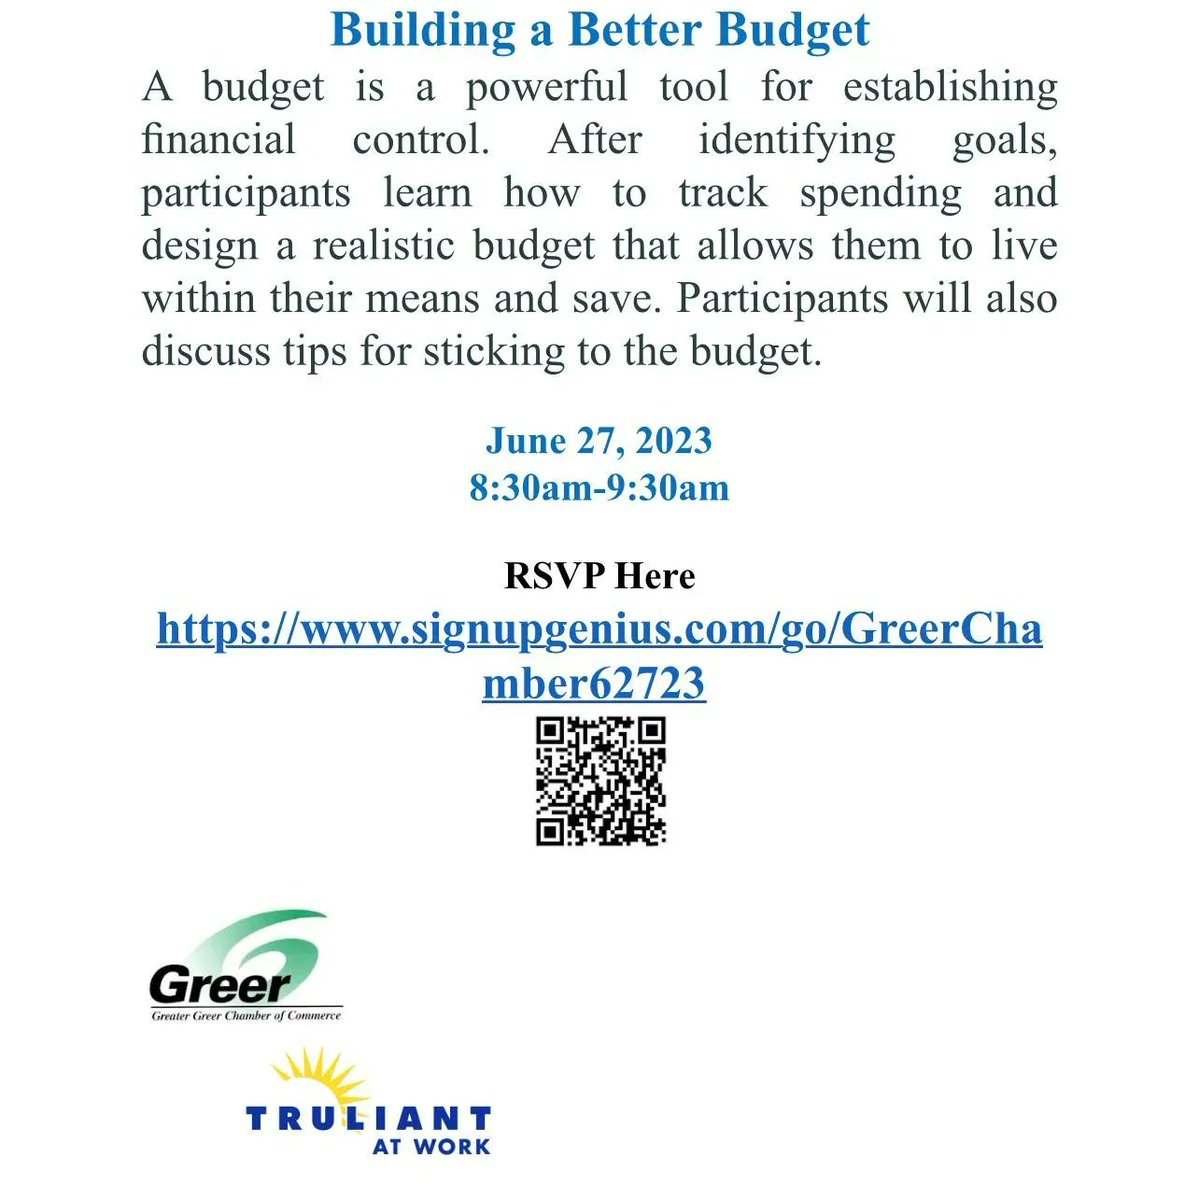 Truliant is having a workshop to help you build a better budget! Visit the link for more information! 

buff.ly/3PkW25g 

#truliant #workshop #budget #greer #greersc #greerchamber #chamber #commerce #chamberofcommerce #credit #economics #economic #greenvillesc